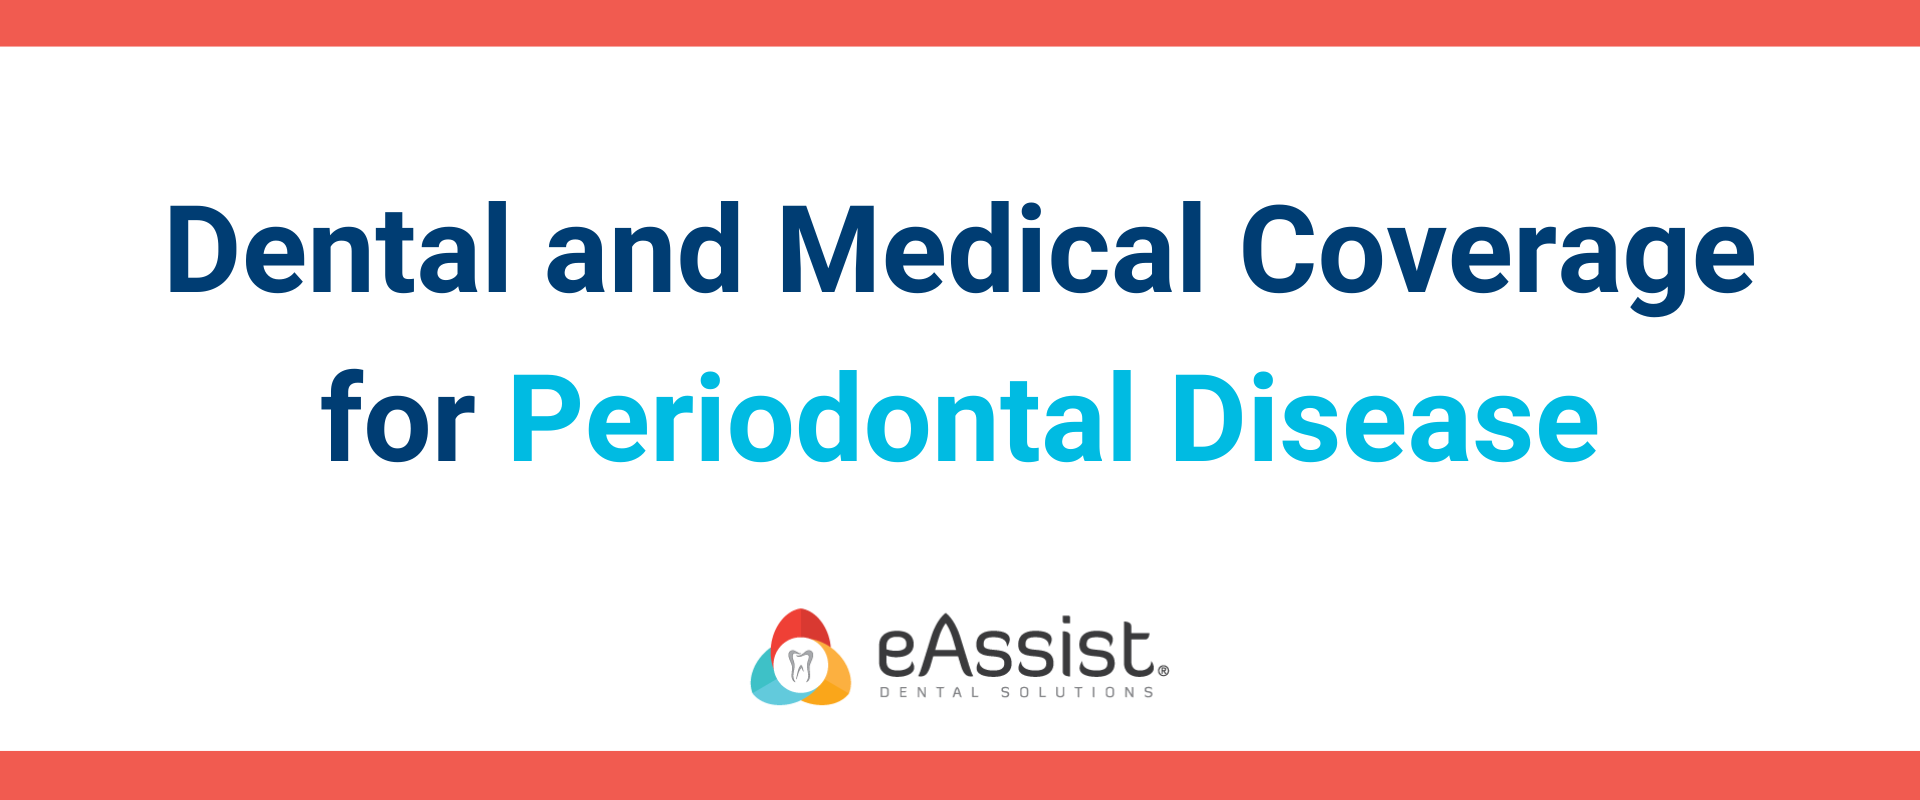 Dental and Medical Coverage for Periodontal Disease